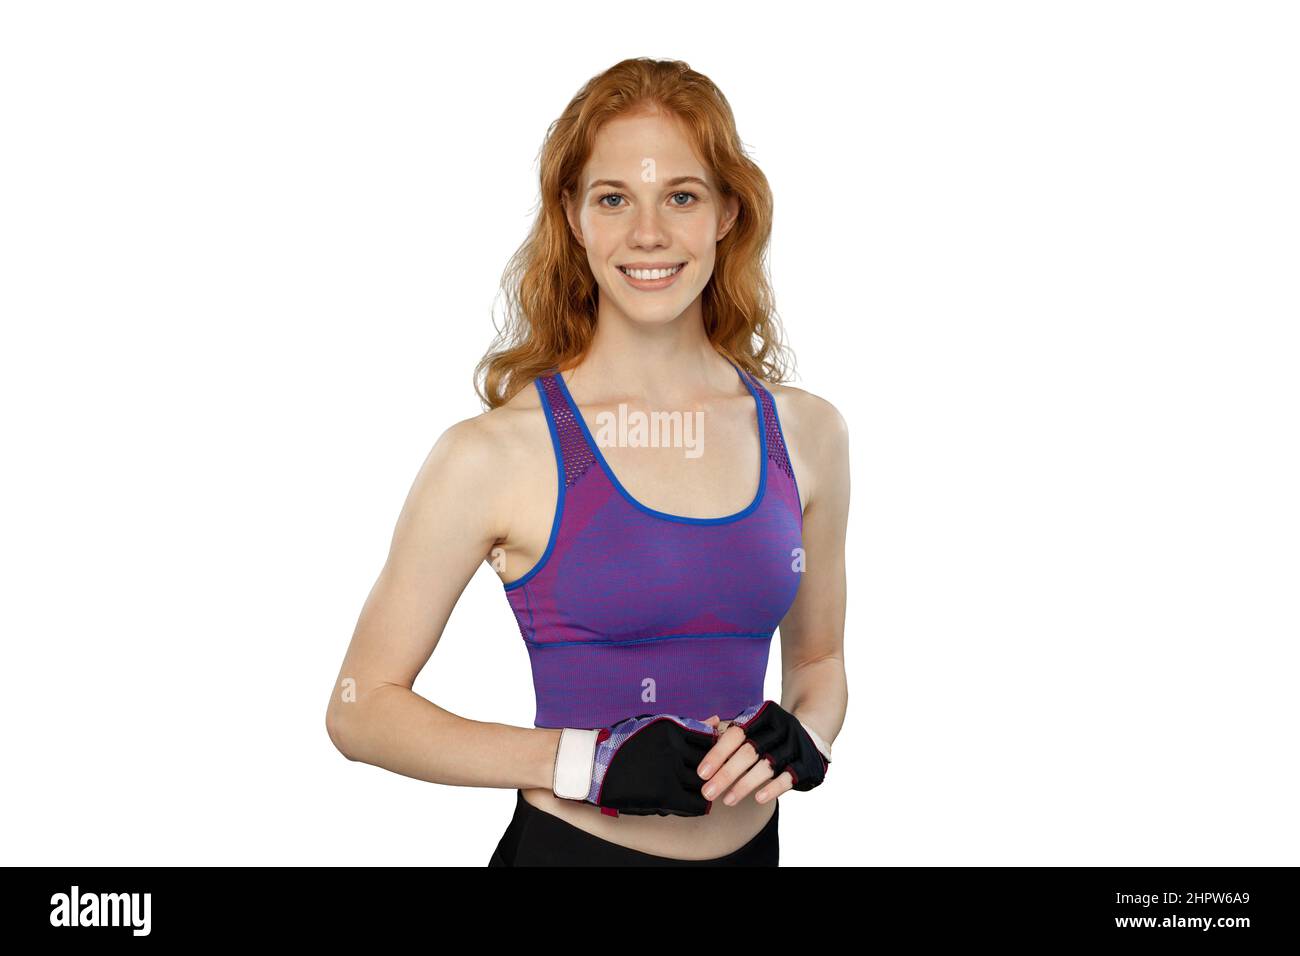 Red female athlete wearing training gloves and tank top. Smiling sporty woman poses on white background. Stock Photo